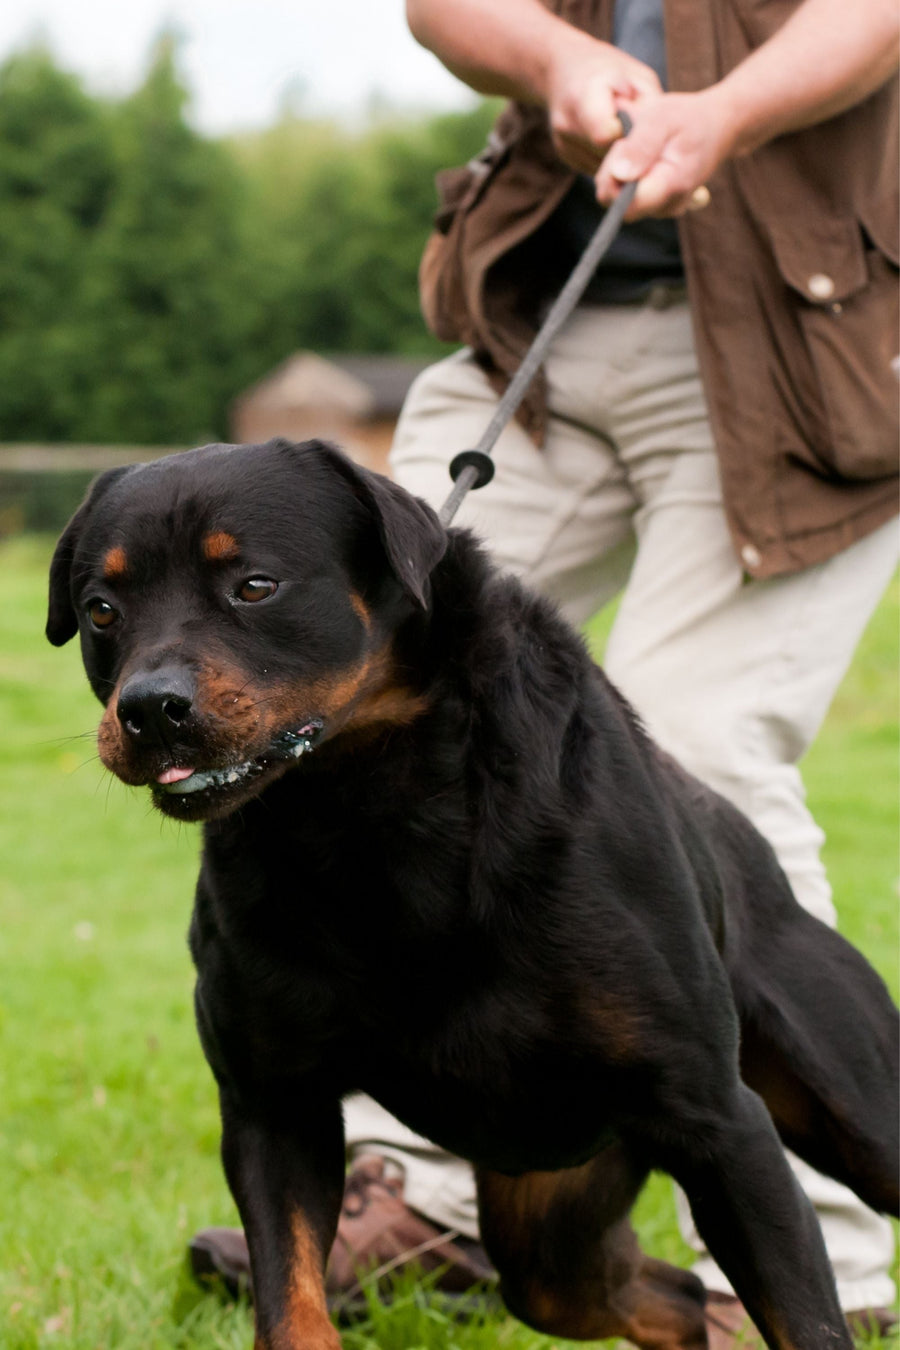 large rottweiler dog pulling on a leash with their human barely able to hang on with both hands.